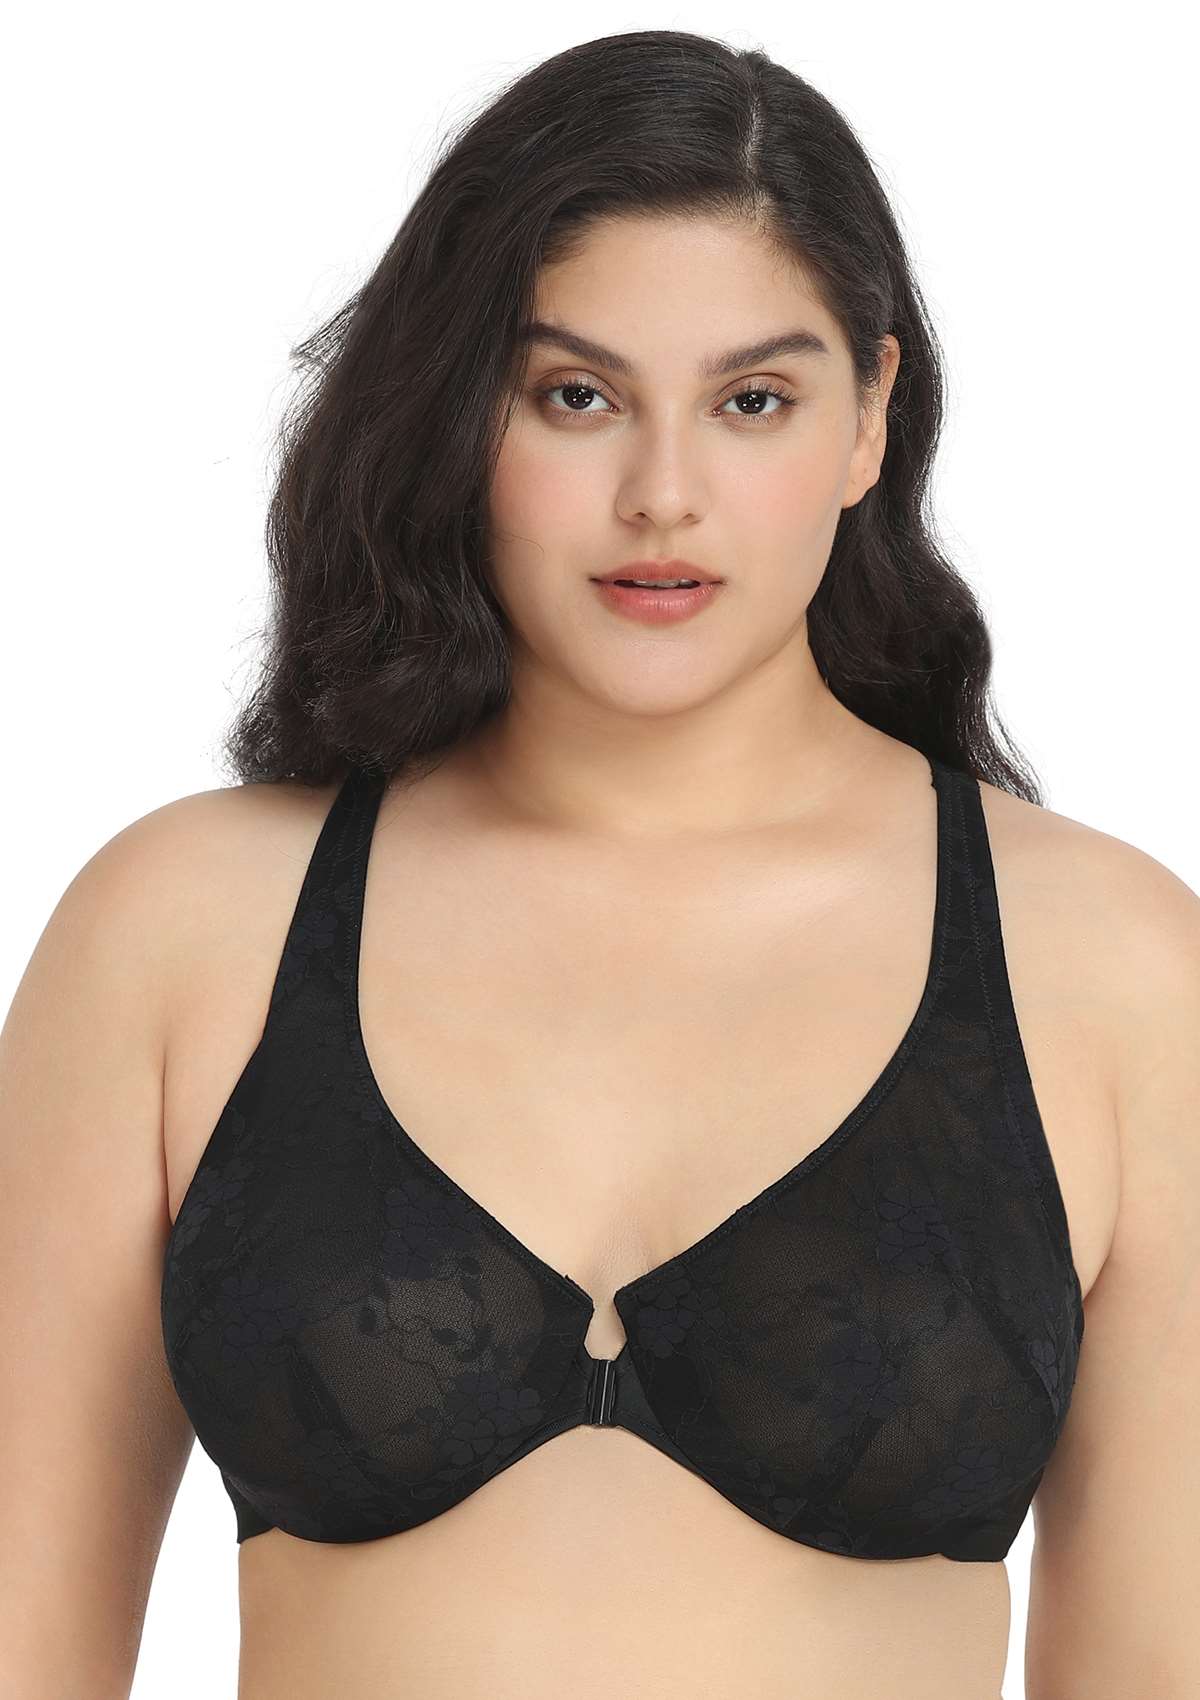 HSIA Spring Romance Front-Close Floral Lace Unlined Full Coverage Bra - Black / 36 / H